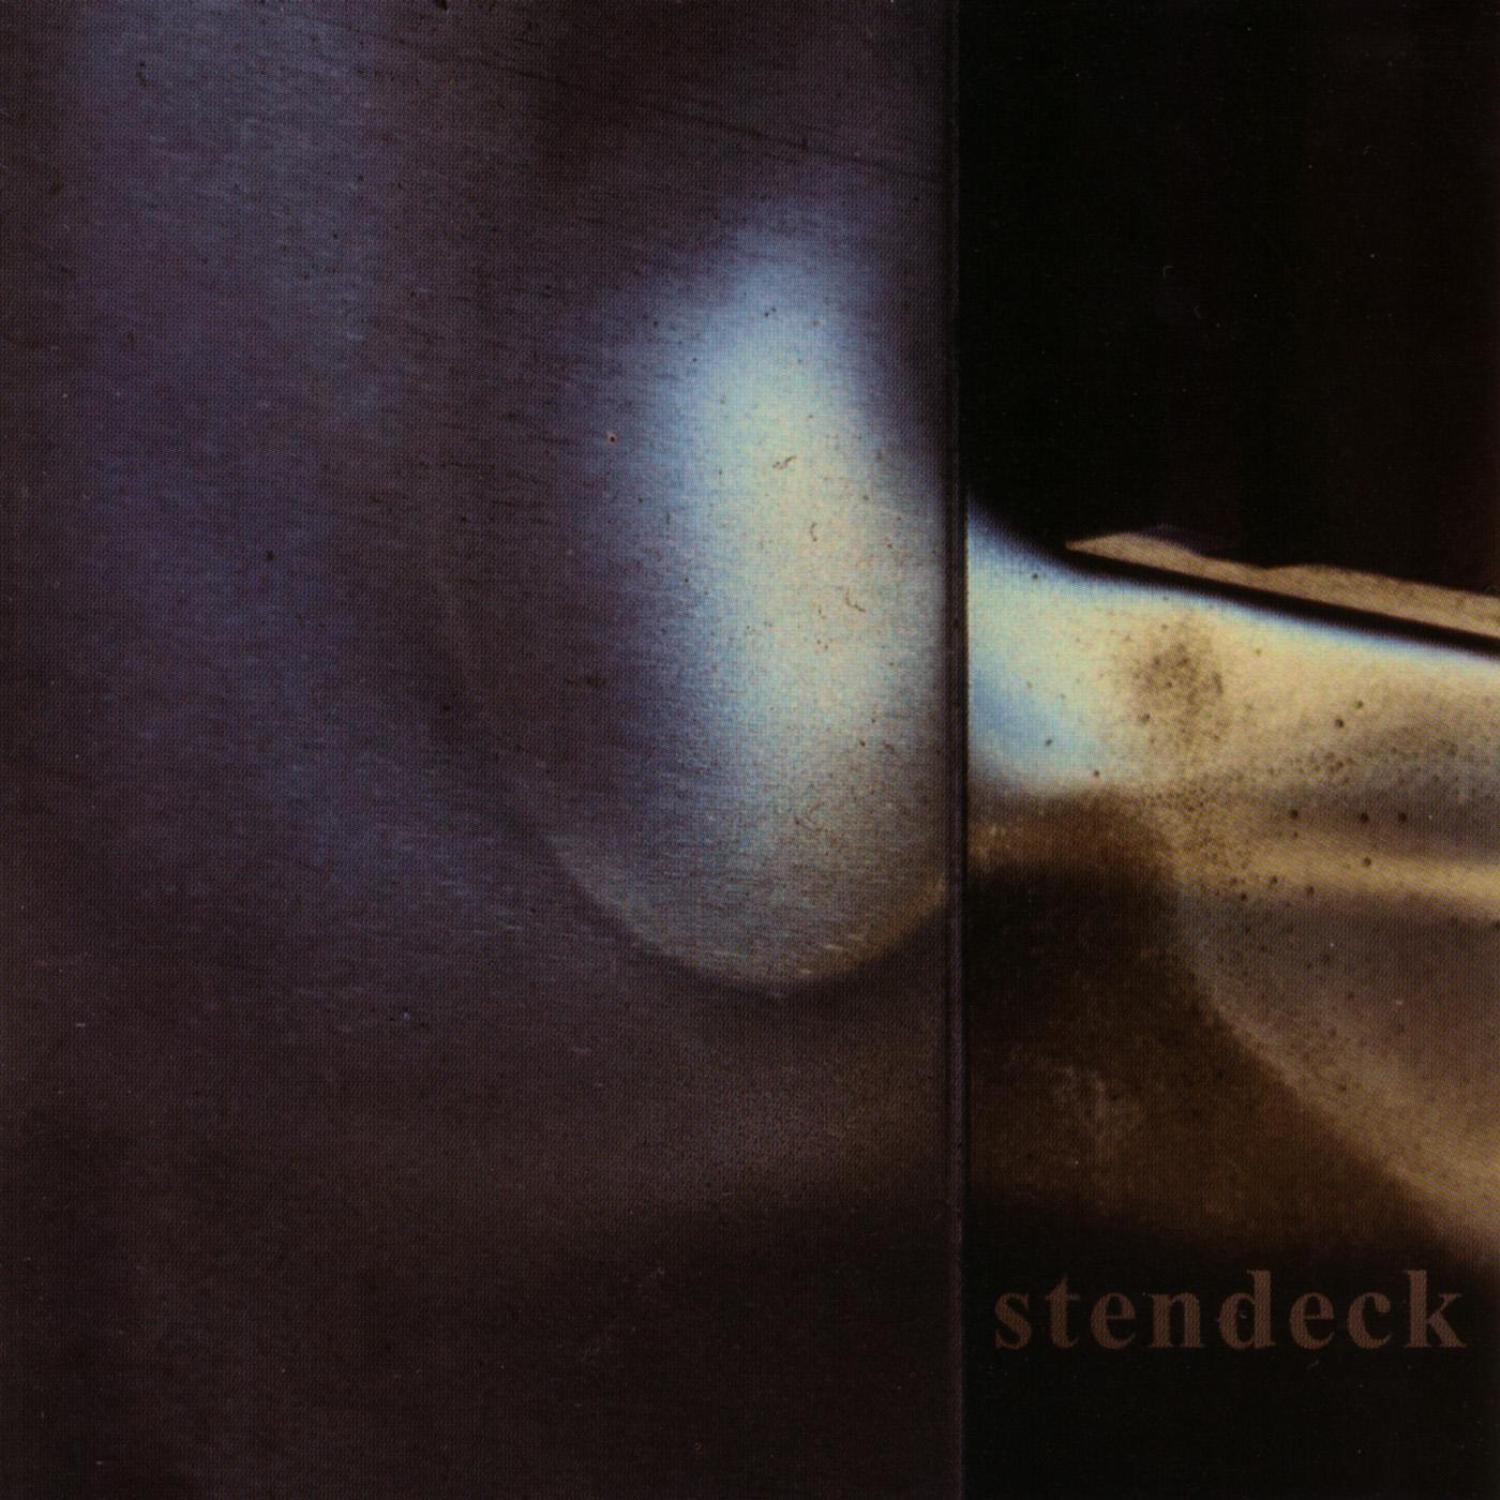 Stendeck - Citylights Slide Behind You, And You Are Just Like A Small Star Lost In The Night